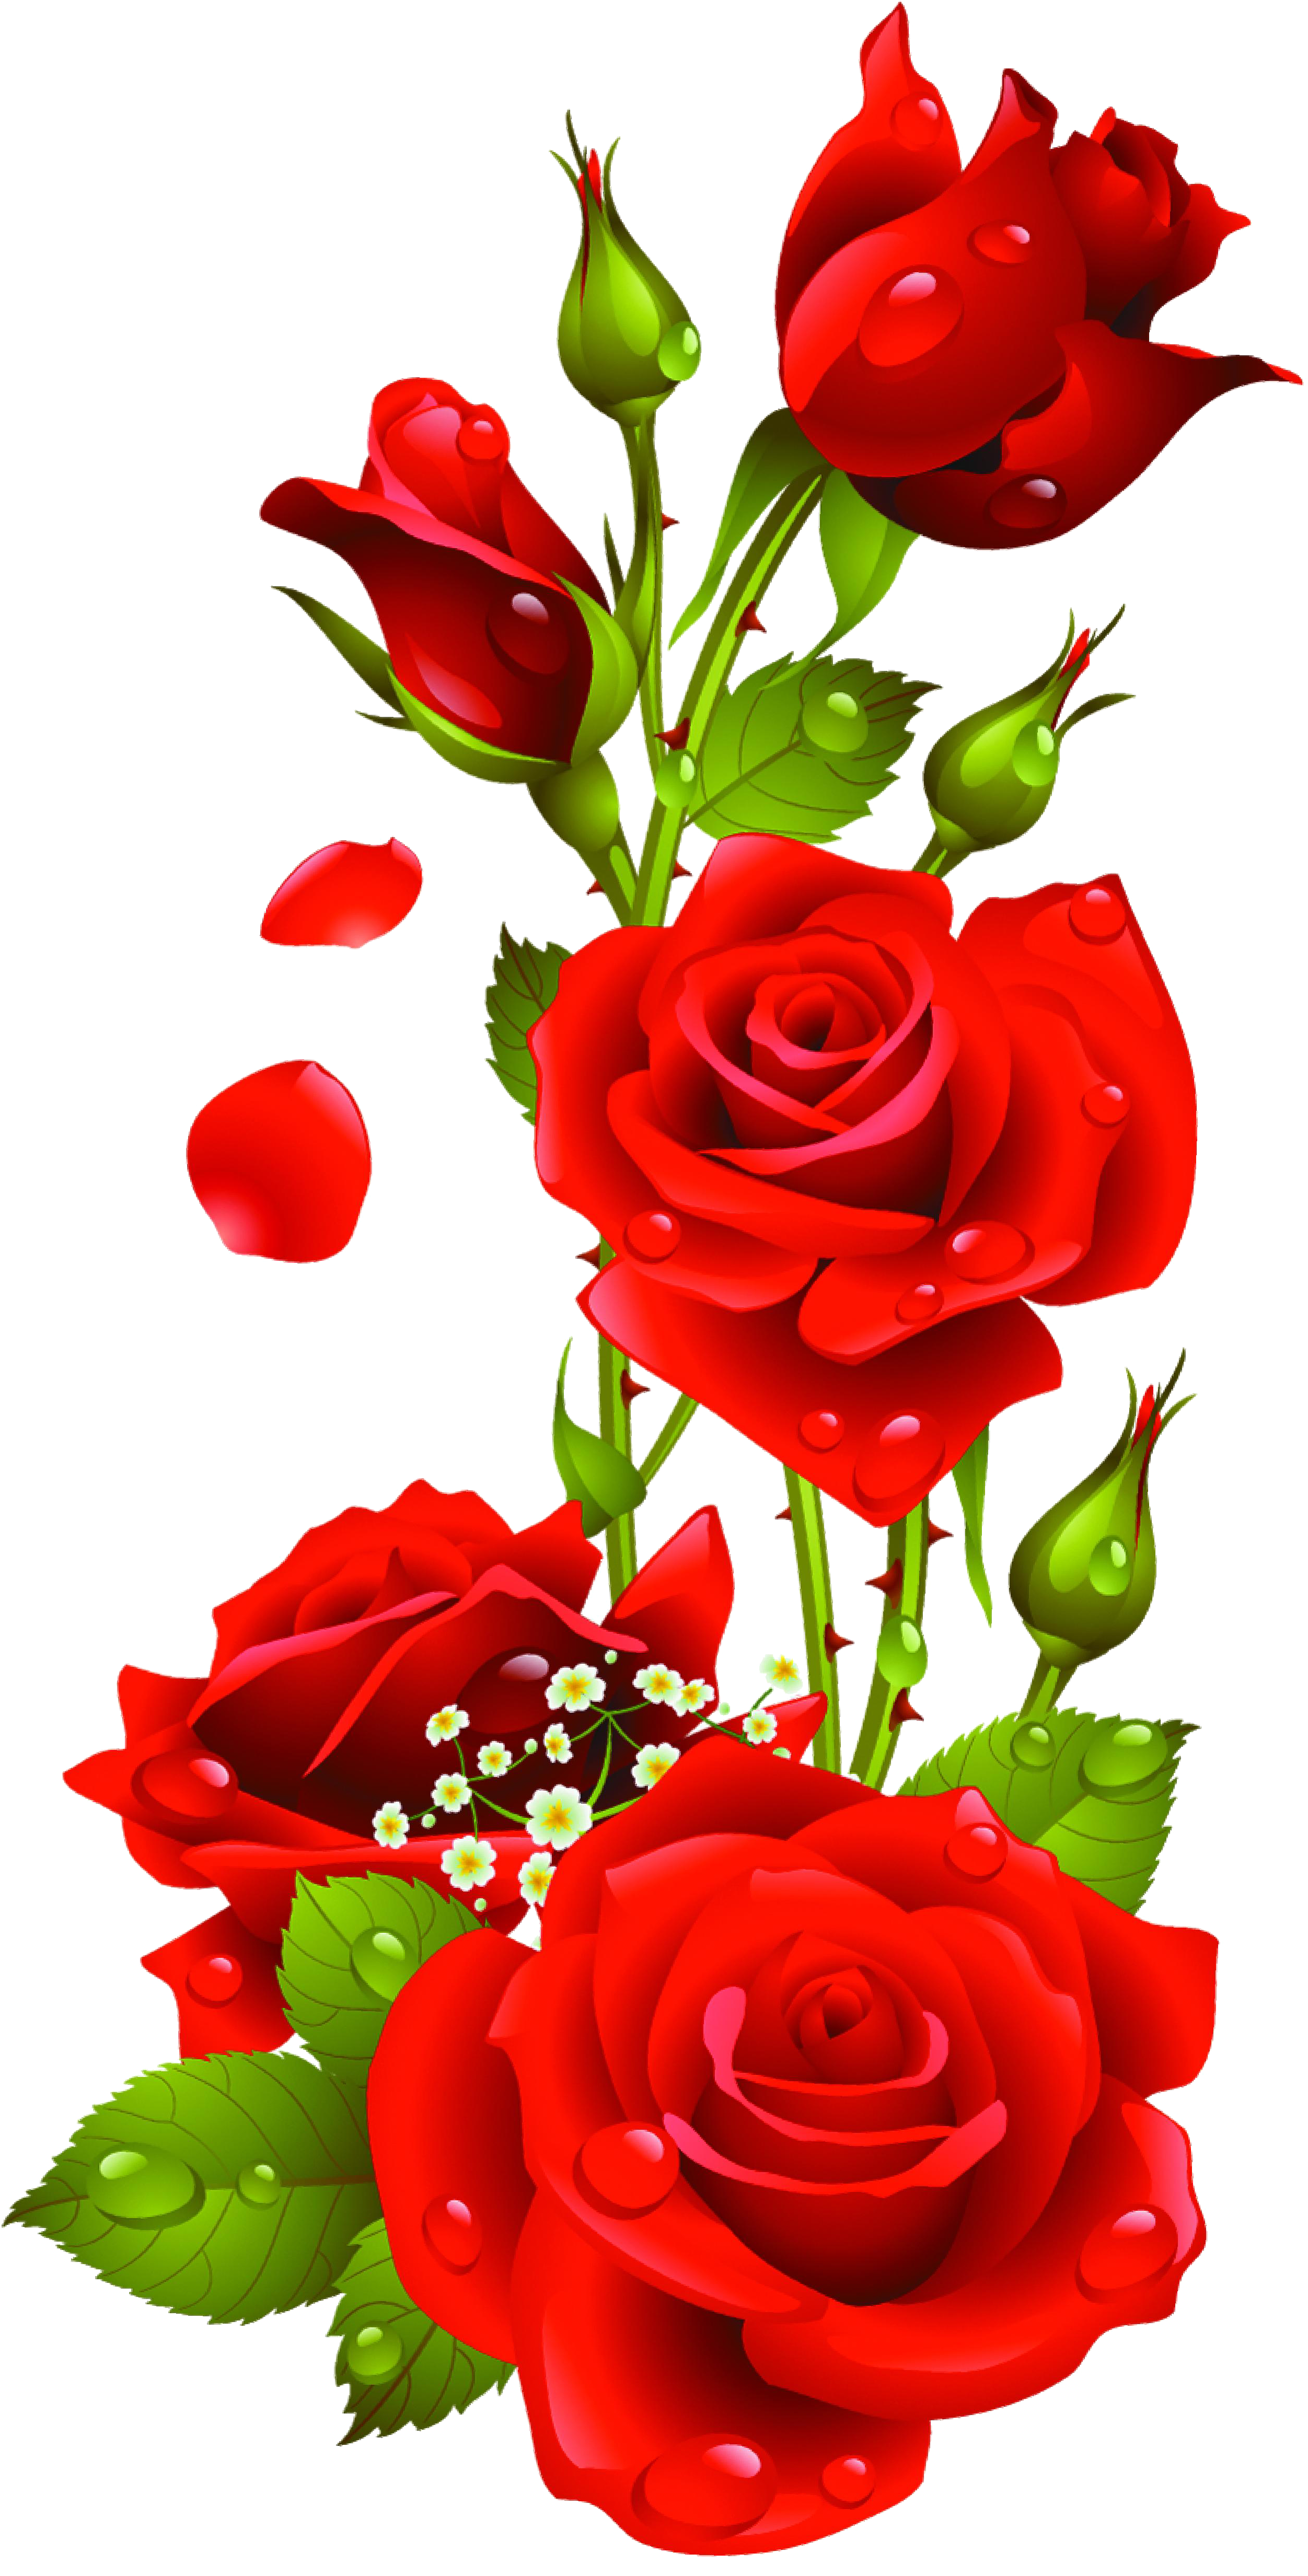 Hd Rose Image In Our System PNG Transparent Background, Free Download ...